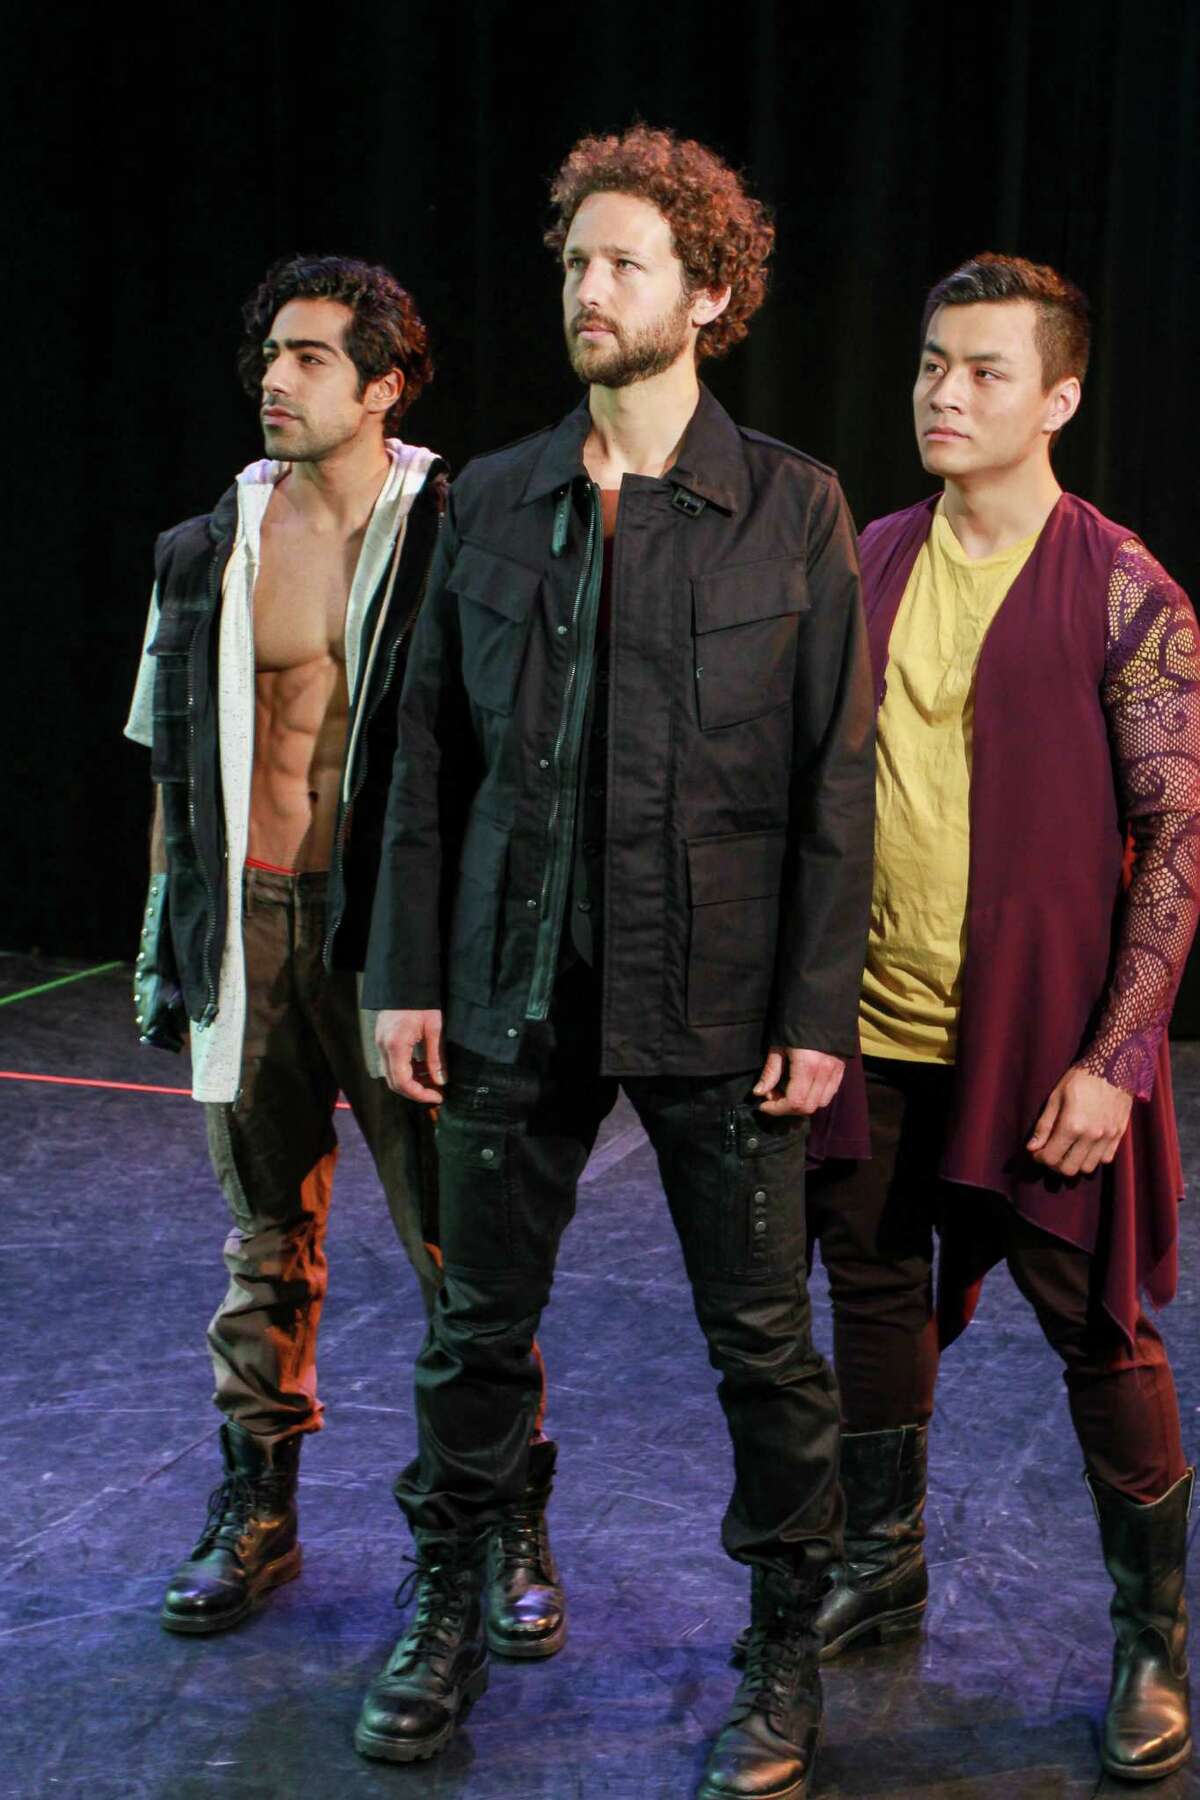 Bottom: Demetria Thomas, from left, stars as Beatrice, Susie Parr as Hero, David Huynh as Claudio and Patrick Poole as Benedick in "Much Ado About Nothing," this staging set in the late 1800s.